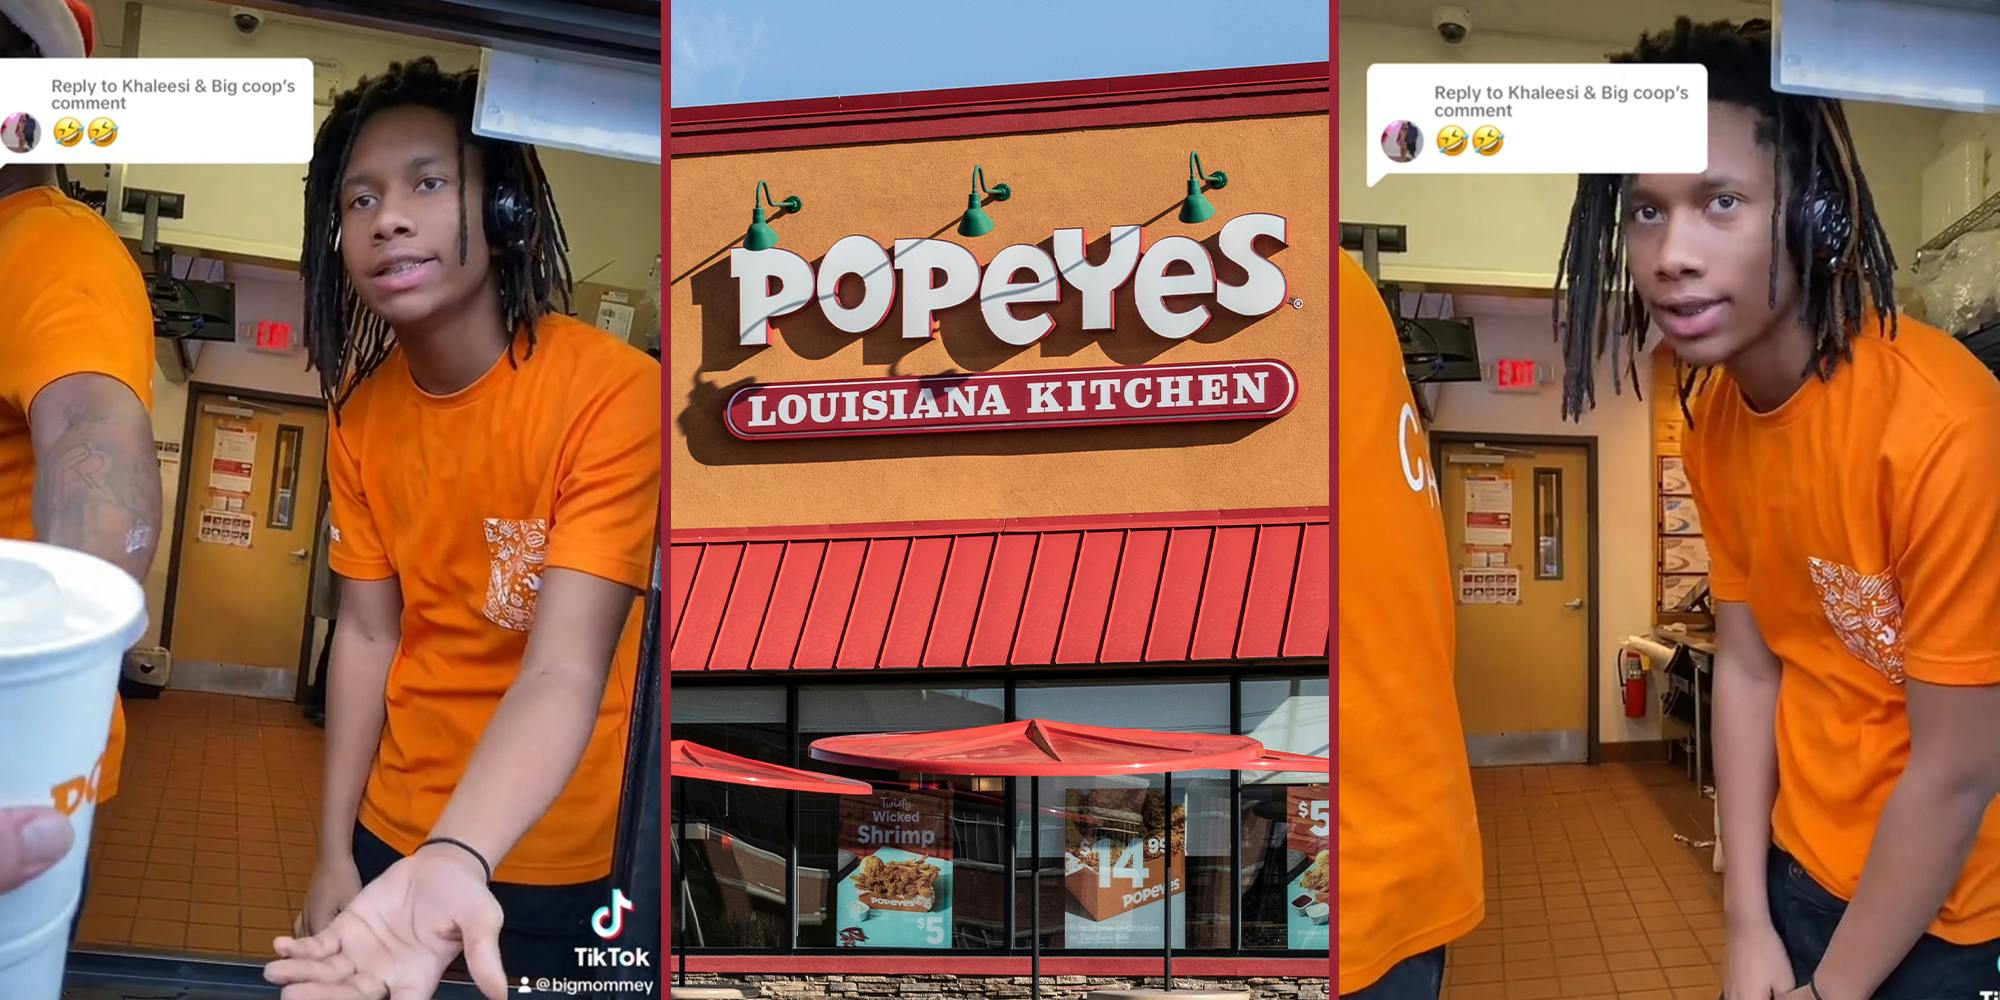 Customer catches Popeyes worker in a lie, confronts him in drive-thru